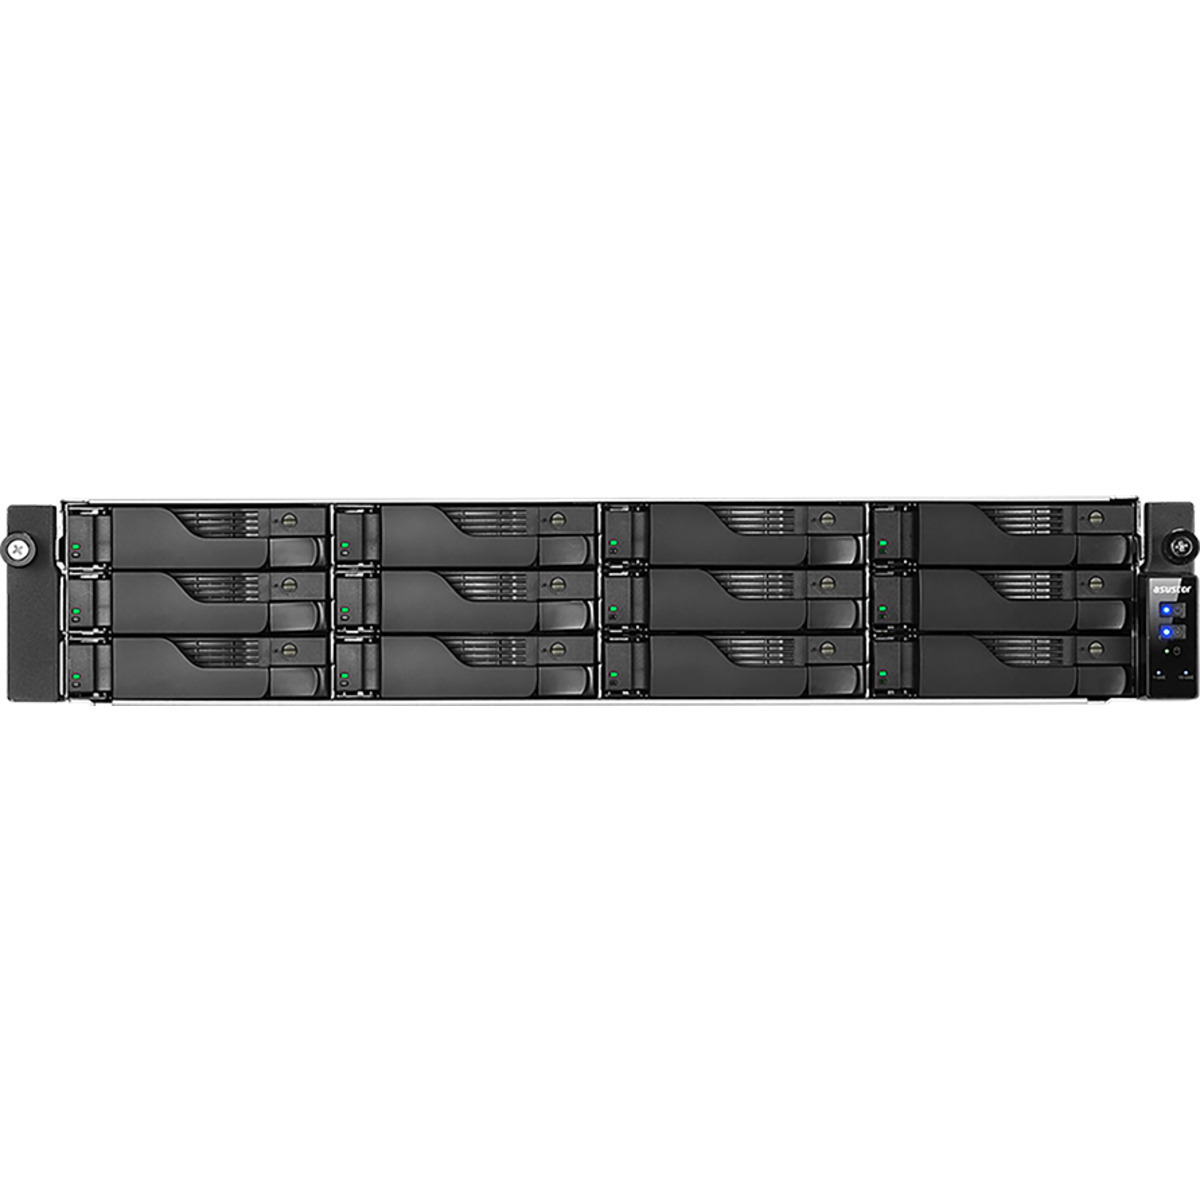 buy ASUSTOR LOCKERSTOR 12RD AS6512RD 48tb RackMount NAS - Network Attached Storage Device 12x4000gb Samsung 870 EVO MZ-77E4T0BAM 2.5 560/530MB/s SATA 6Gb/s SSD CONSUMER Class Drives Installed - Burn-In Tested - FREE RAM UPGRADE - nas headquarters buy network attached storage server device das new raid-5 free shipping simply usa LOCKERSTOR 12RD AS6512RD